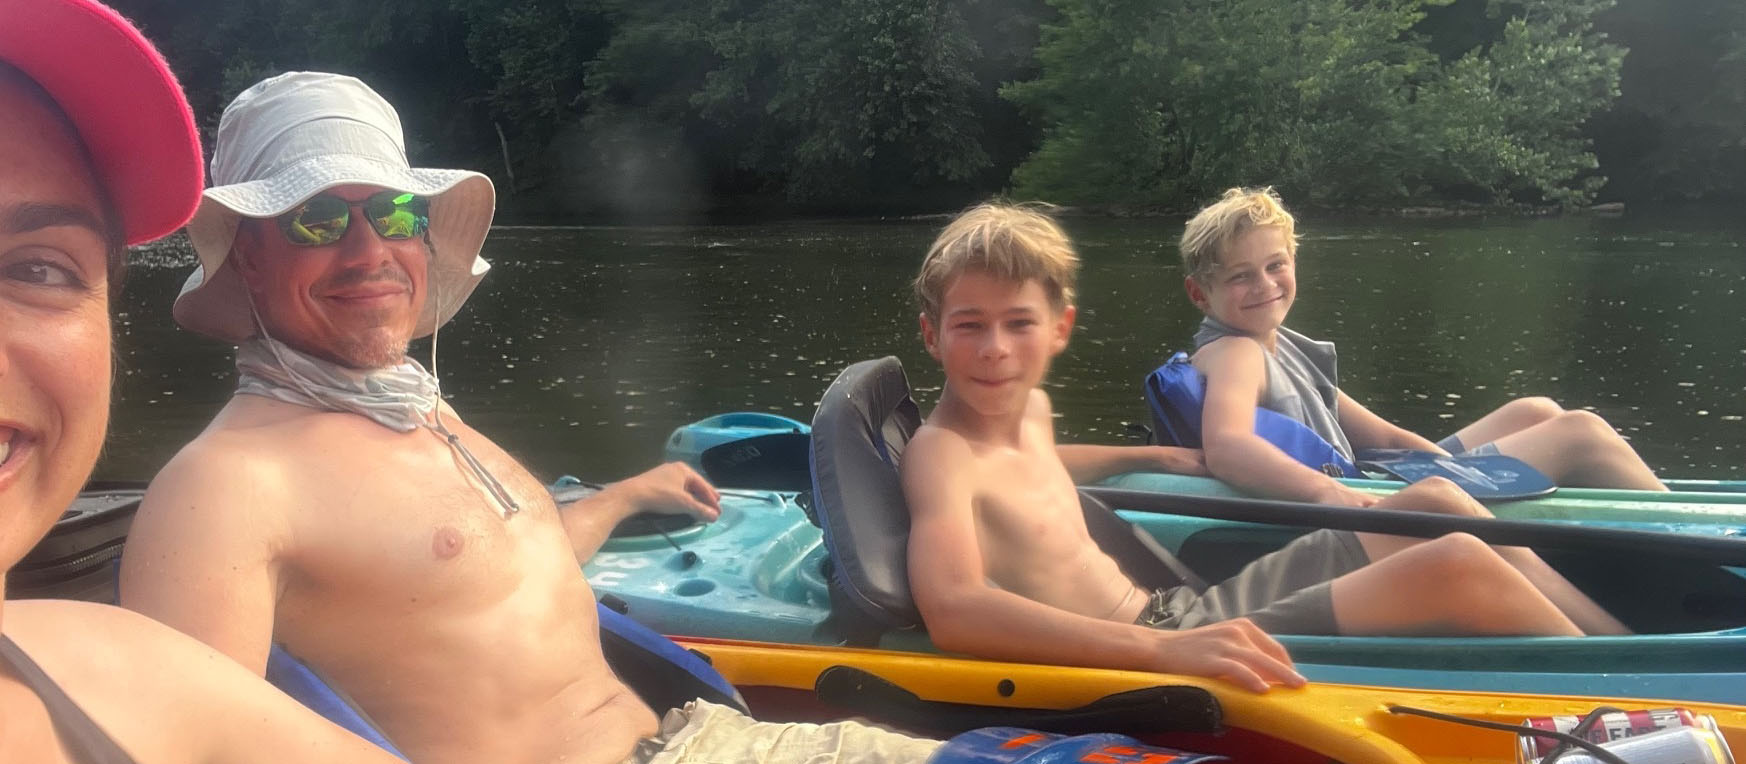 Will the Heat Ever End? Kayaking is a Great Way to Beat the Heat